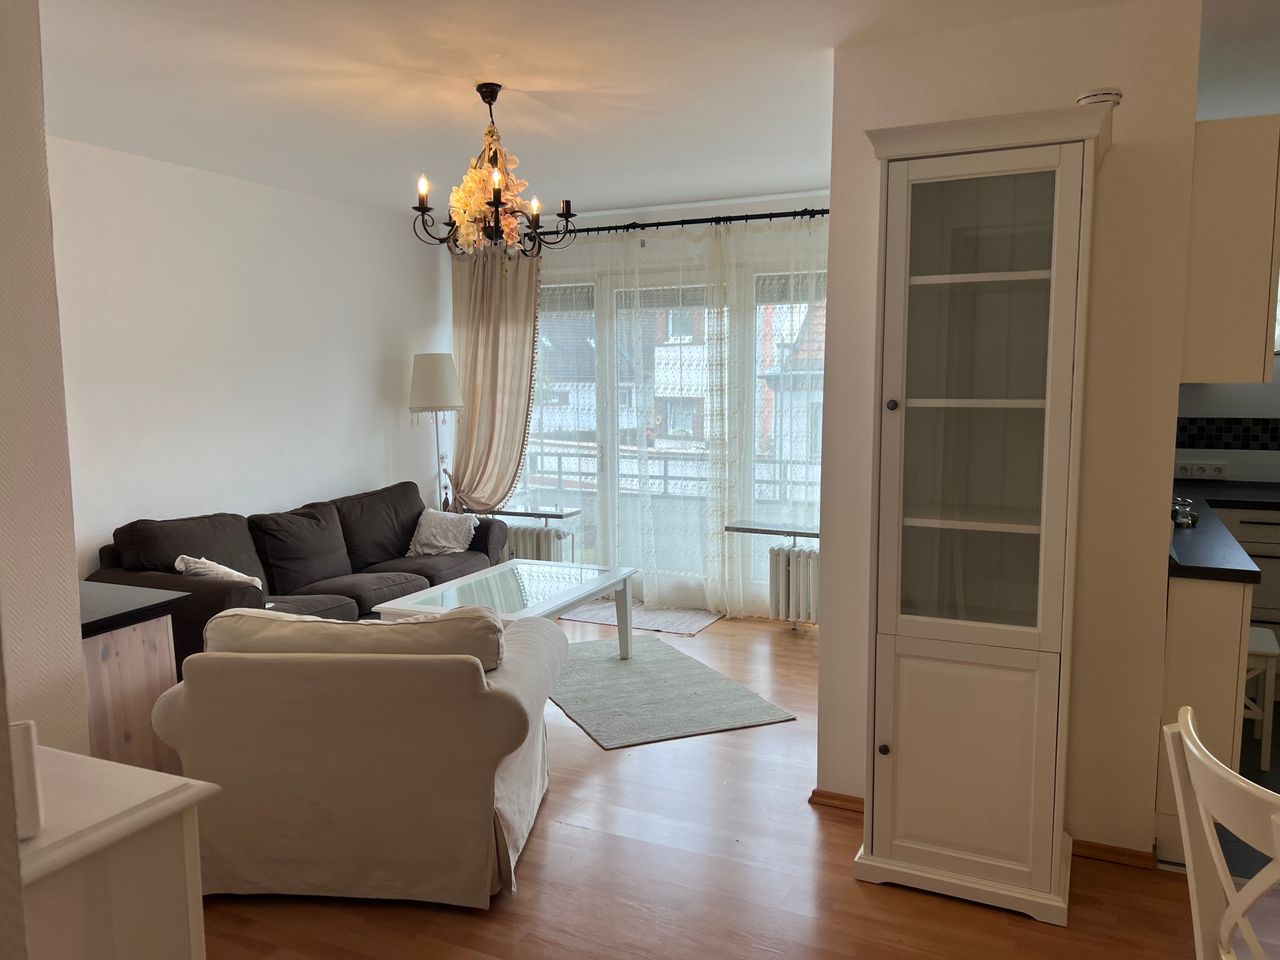 Chic furnished apartment in Düsseldorf: Your new home in Isenburgstraße!